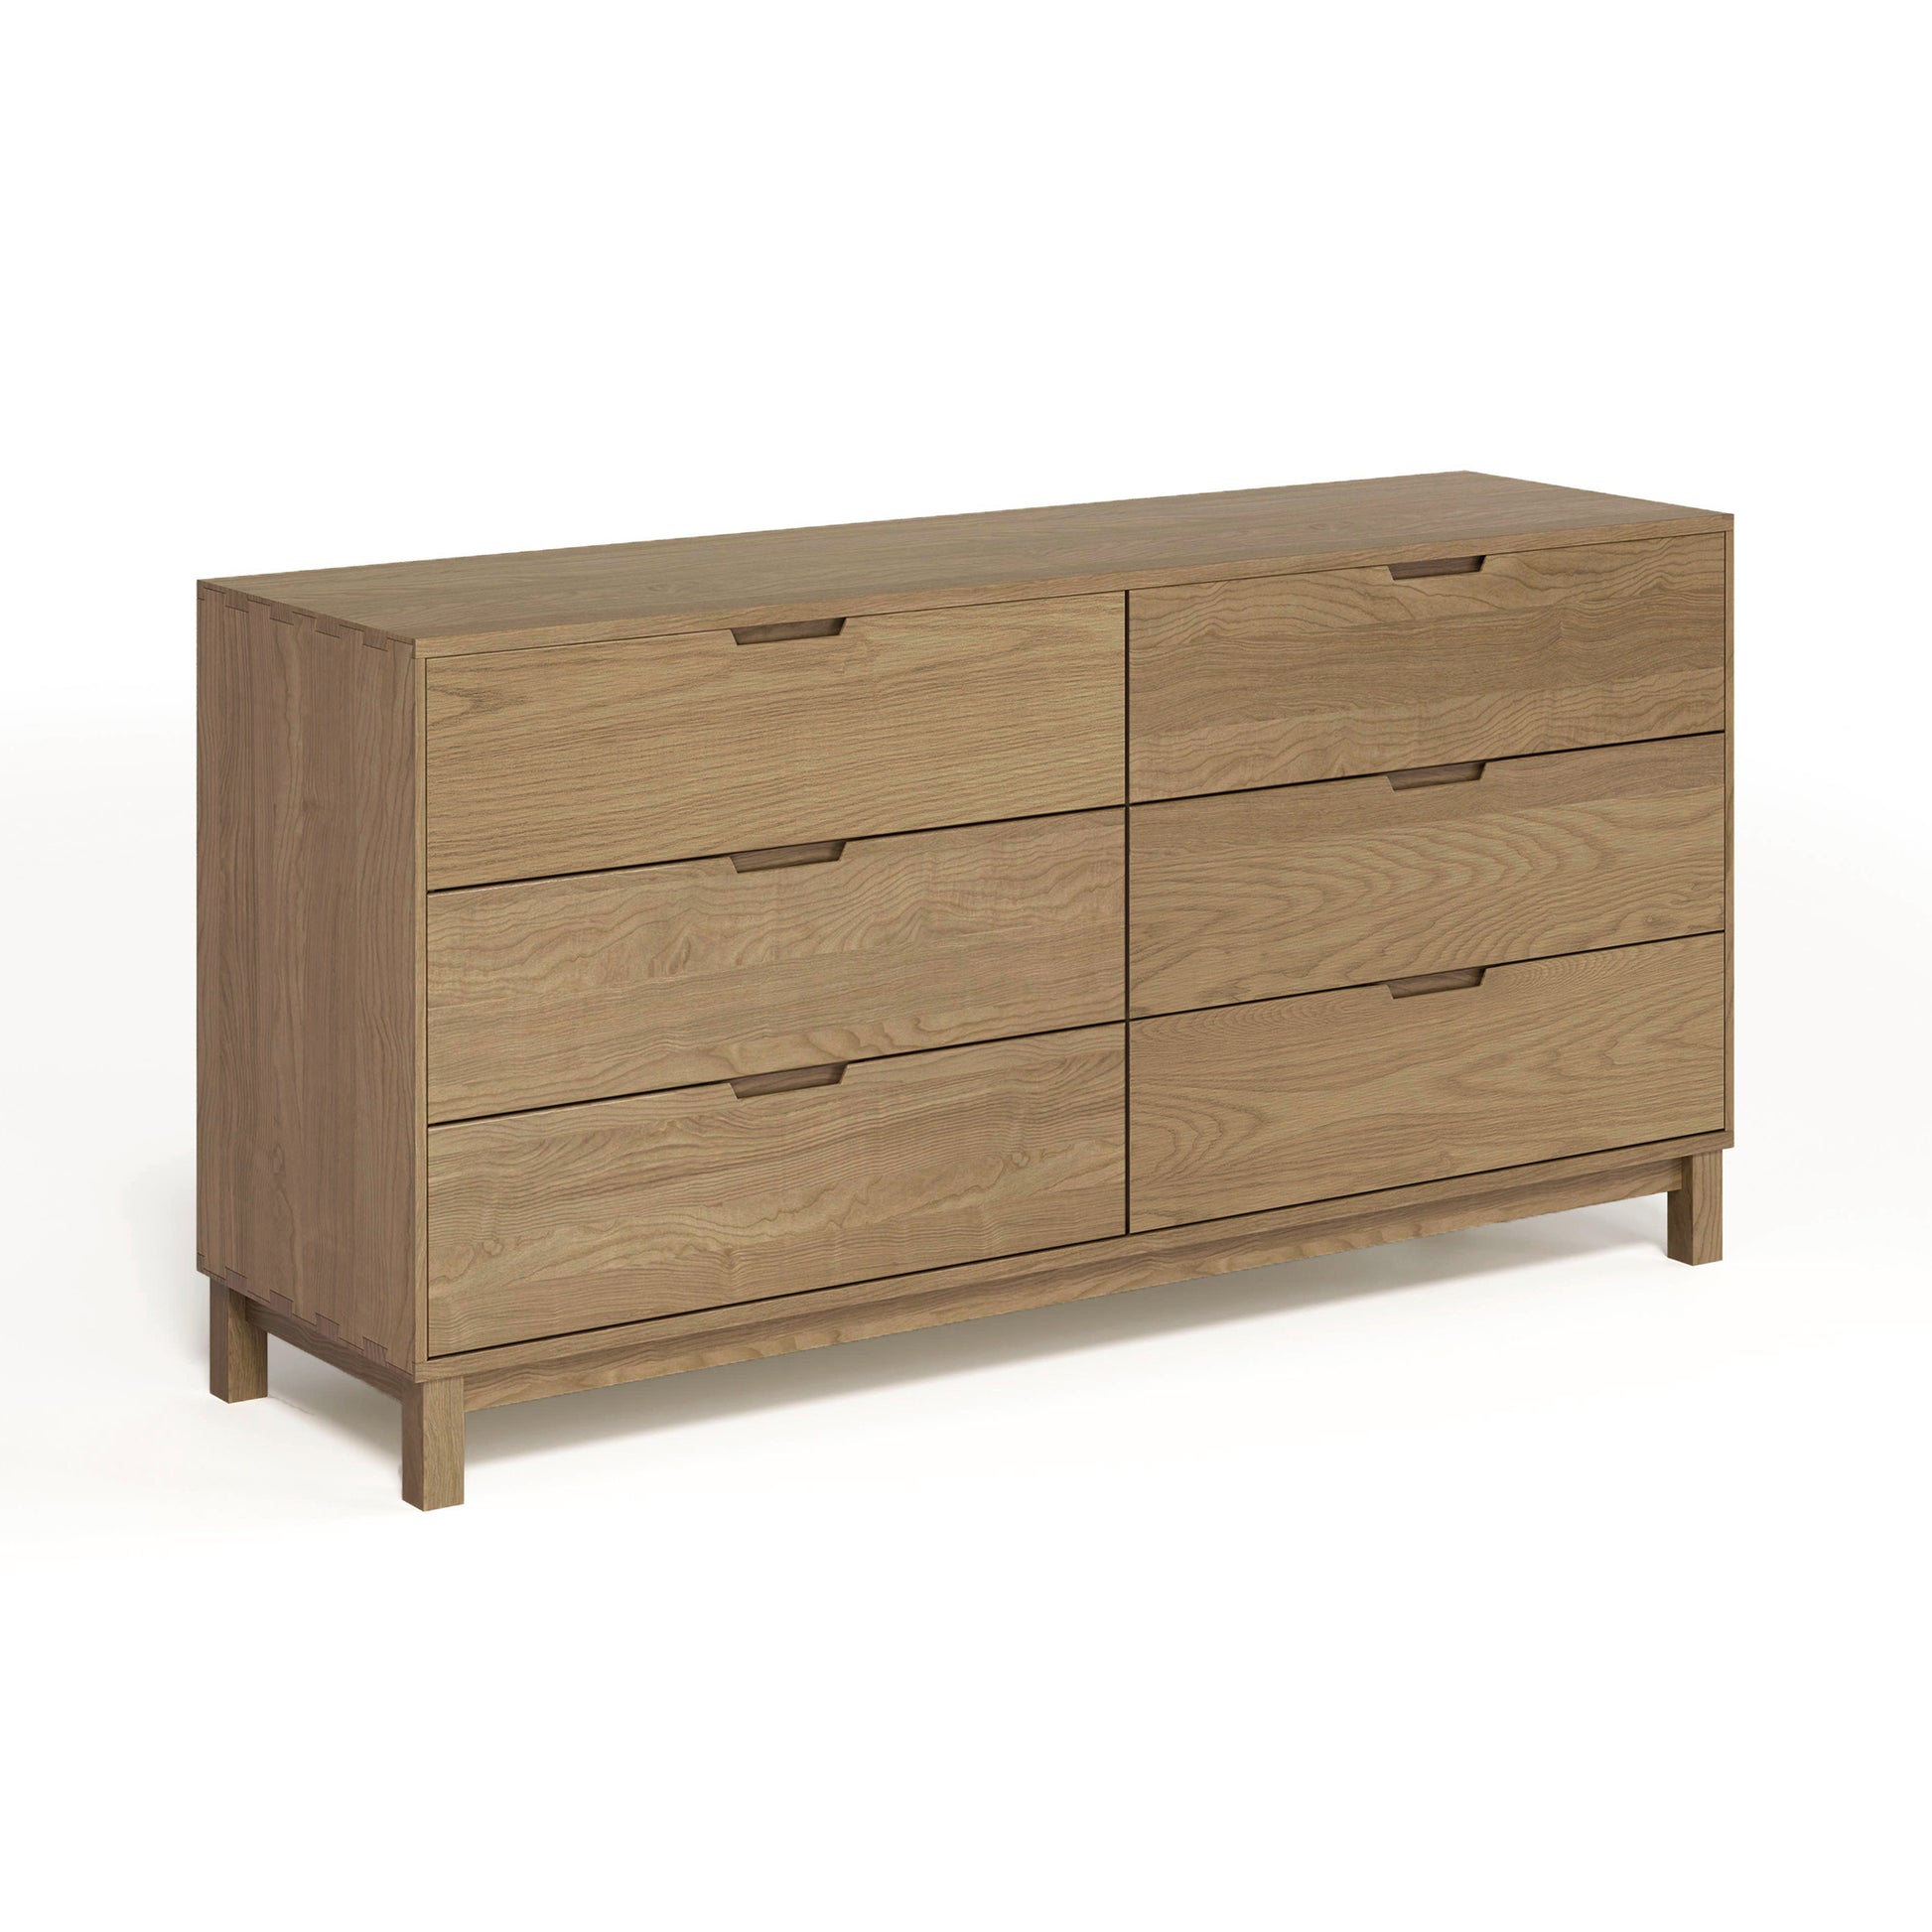 The Copeland Furniture Oslo 6-Drawer Dresser is a stunning piece made of solid natural oak hardwood, offering ample bedroom storage. This exquisite wooden dresser stands out on any white background.